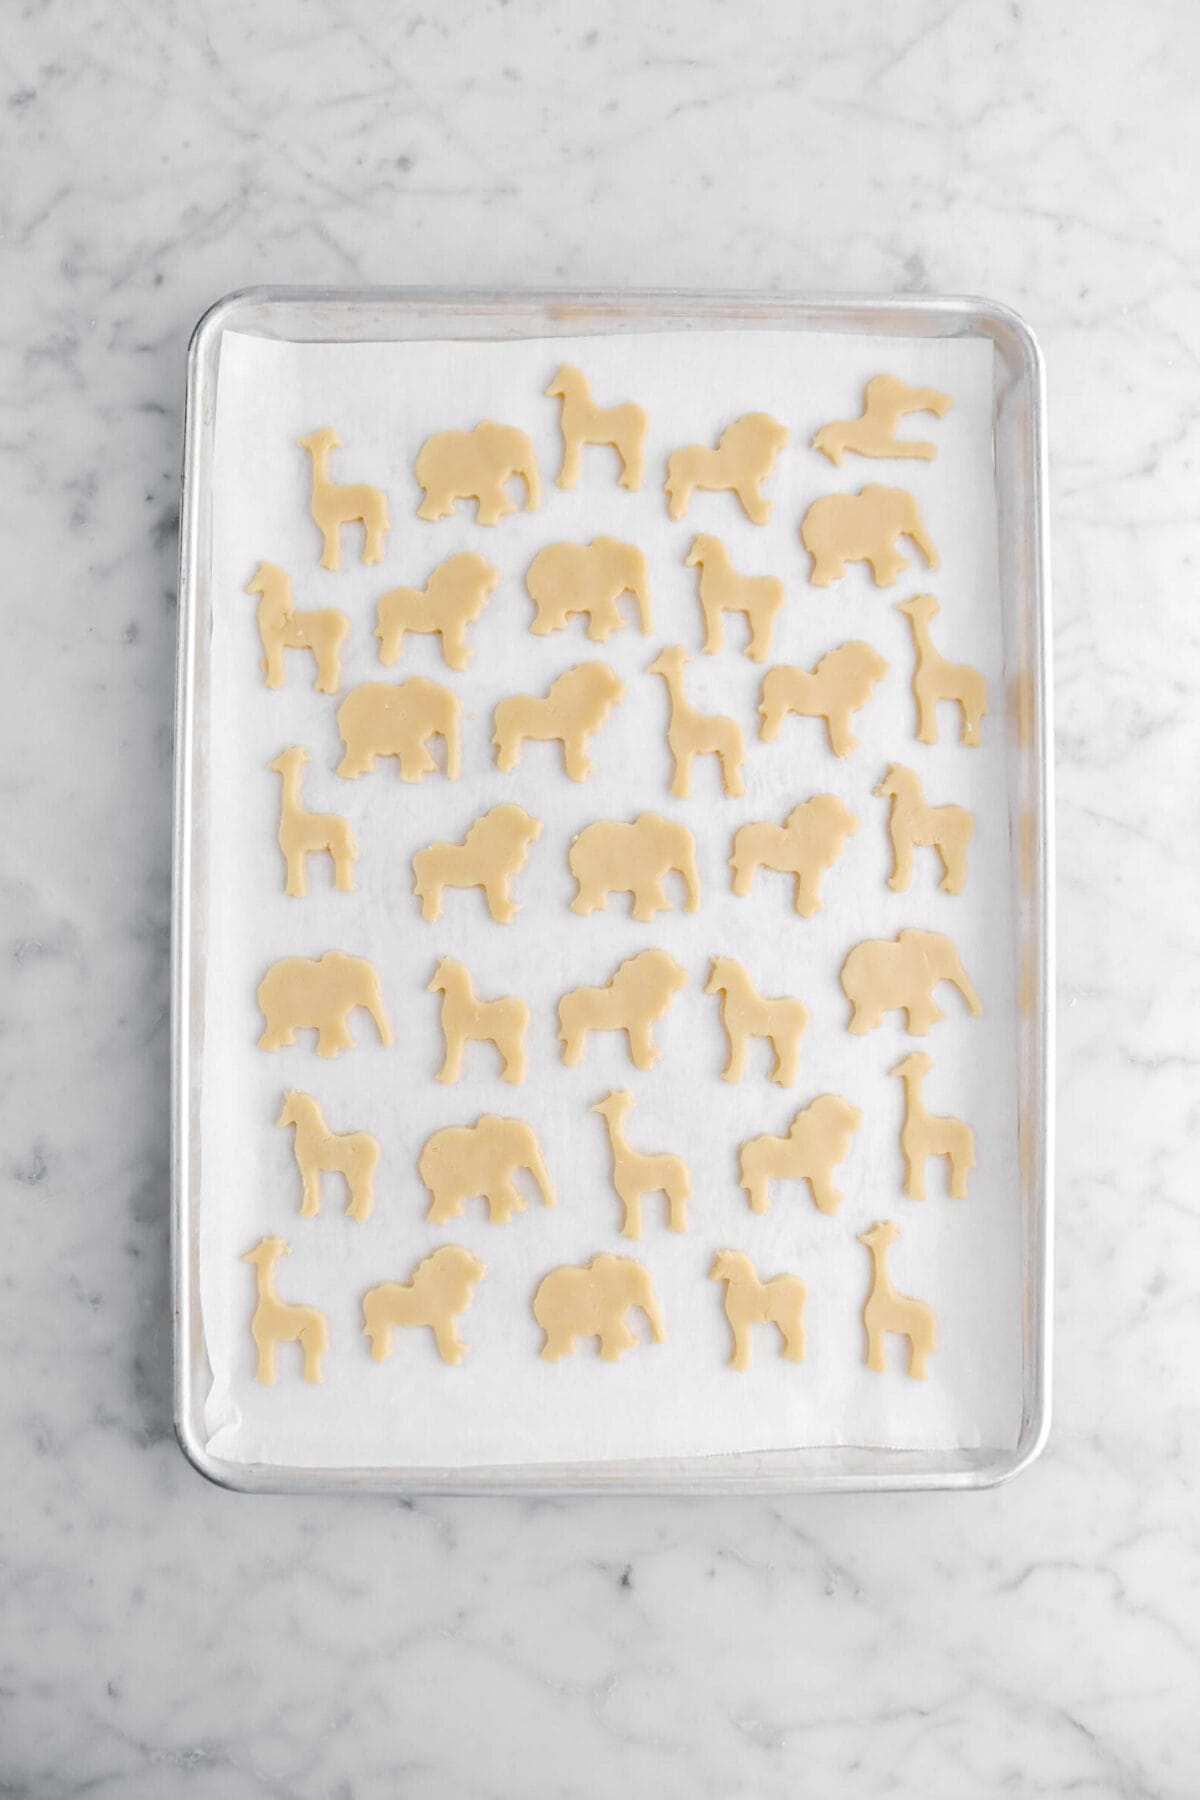 unbaked animal cookies on parchment paper lined sheet pan.